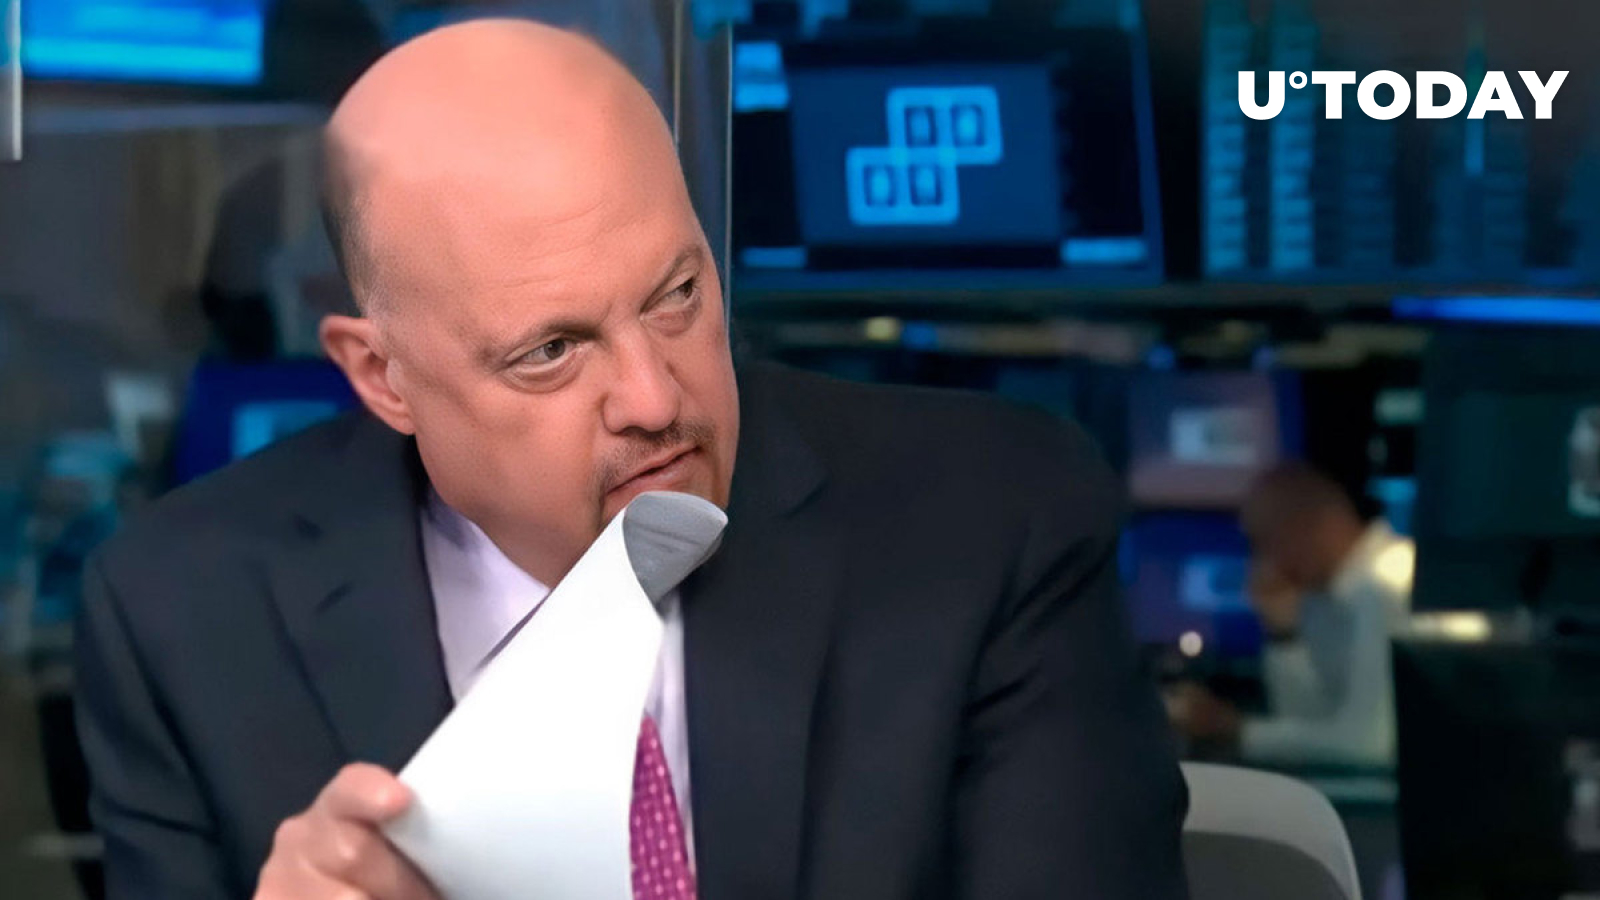 jim-cramer-places-bet-on-cryptocurrencies-warns-about-losing-money-every-year